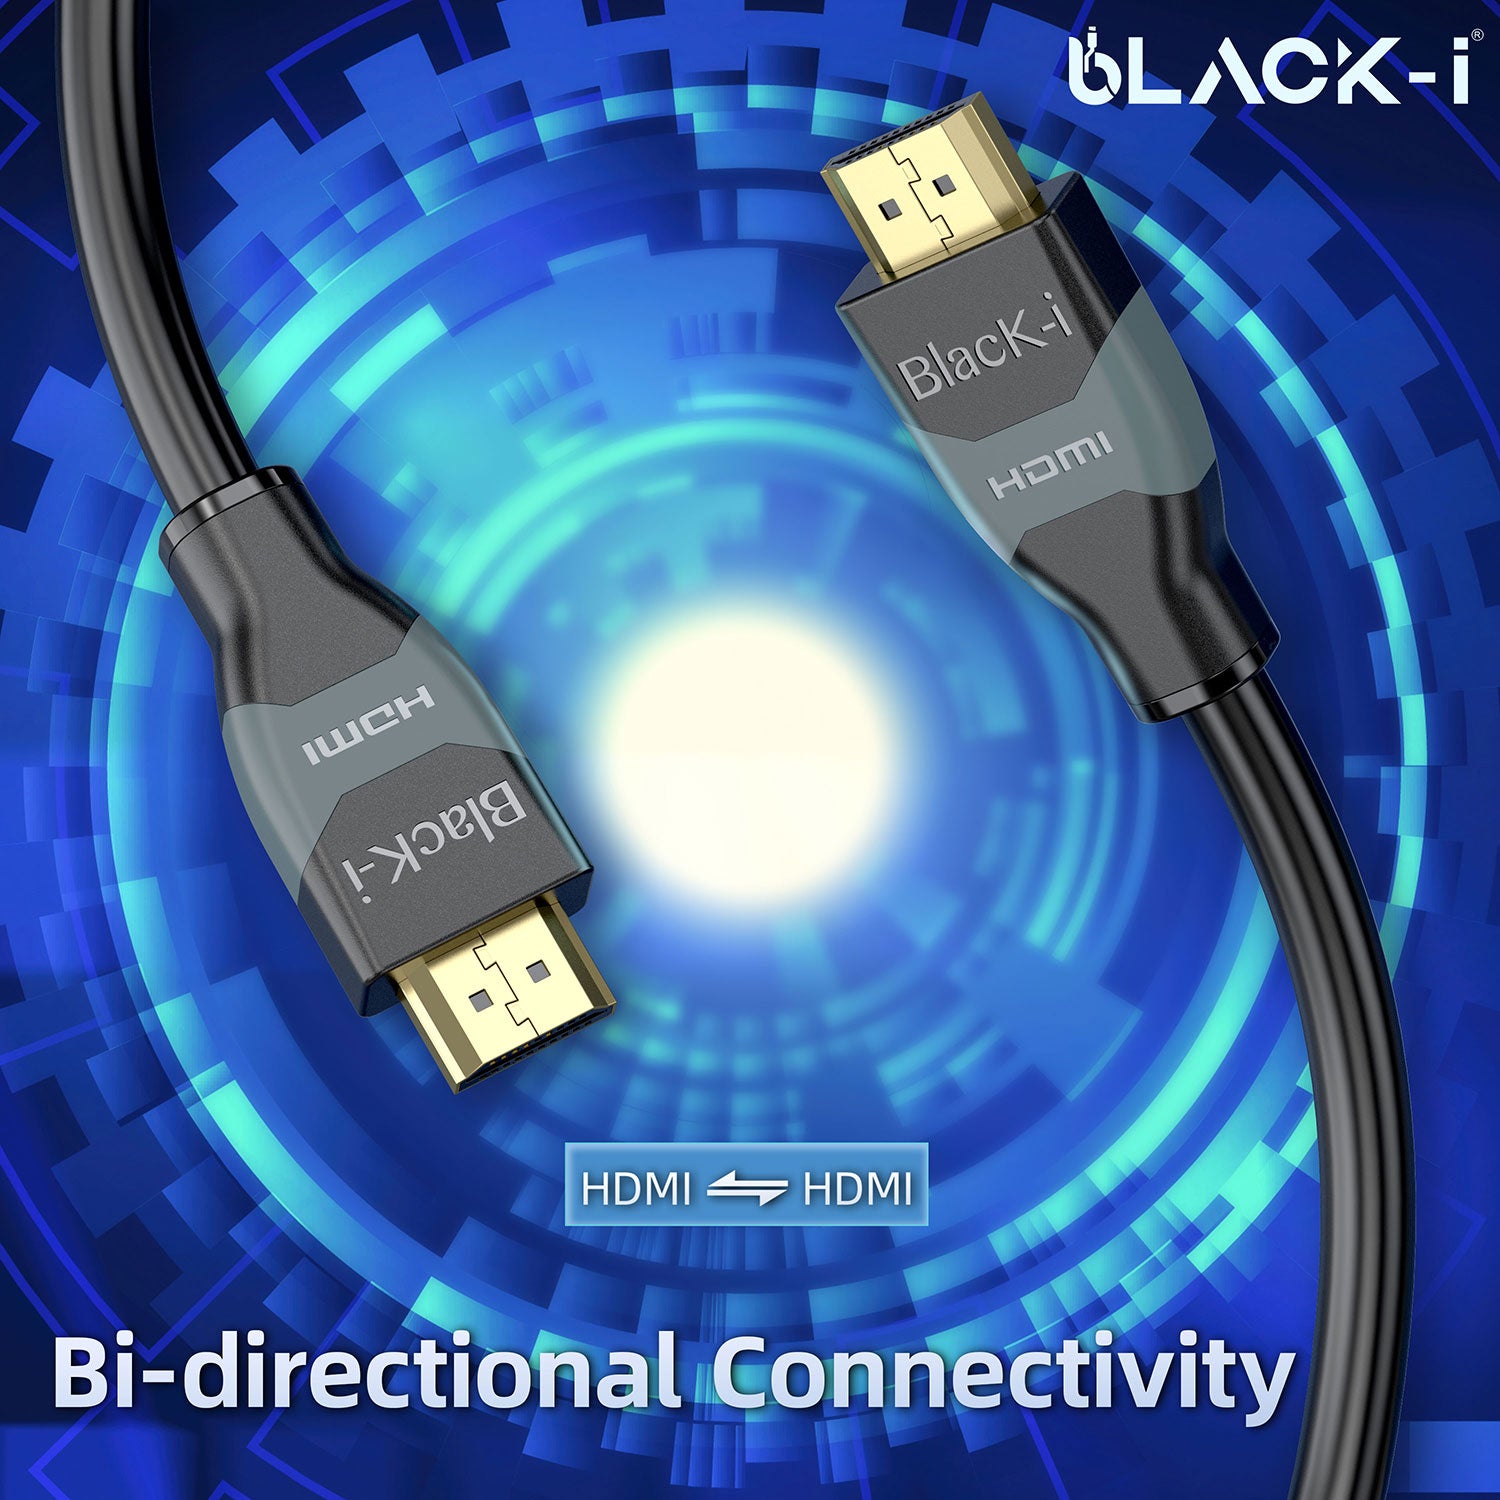 Black-i HDMI 4k cable with ethernet support